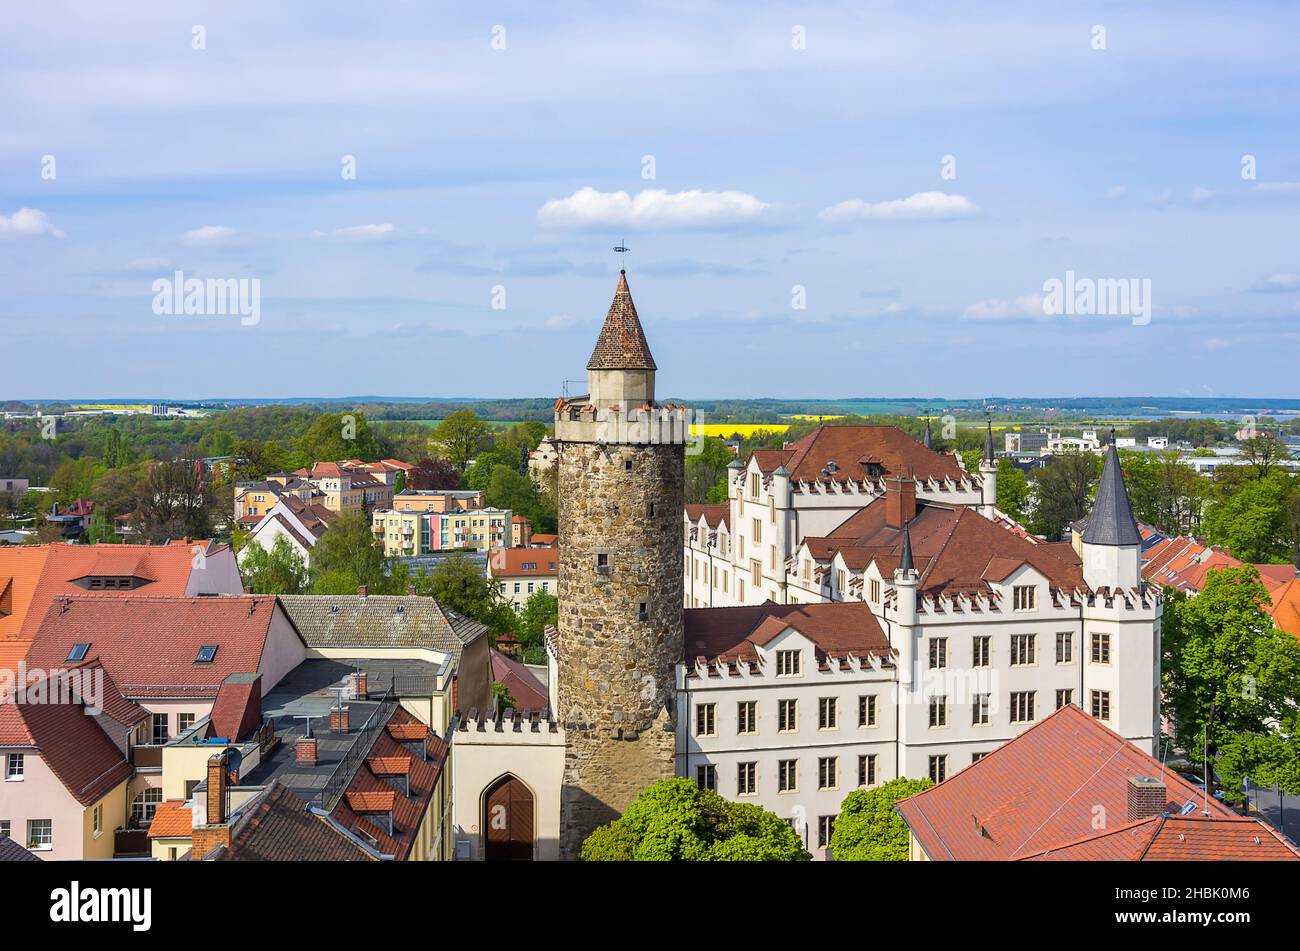 The Wendischer Turm Tower and the Alte Kaserne Barracks being part of the old historic town fortification of Bautzen, Upper Lusatia, Saxony, Germany. Stock Photo